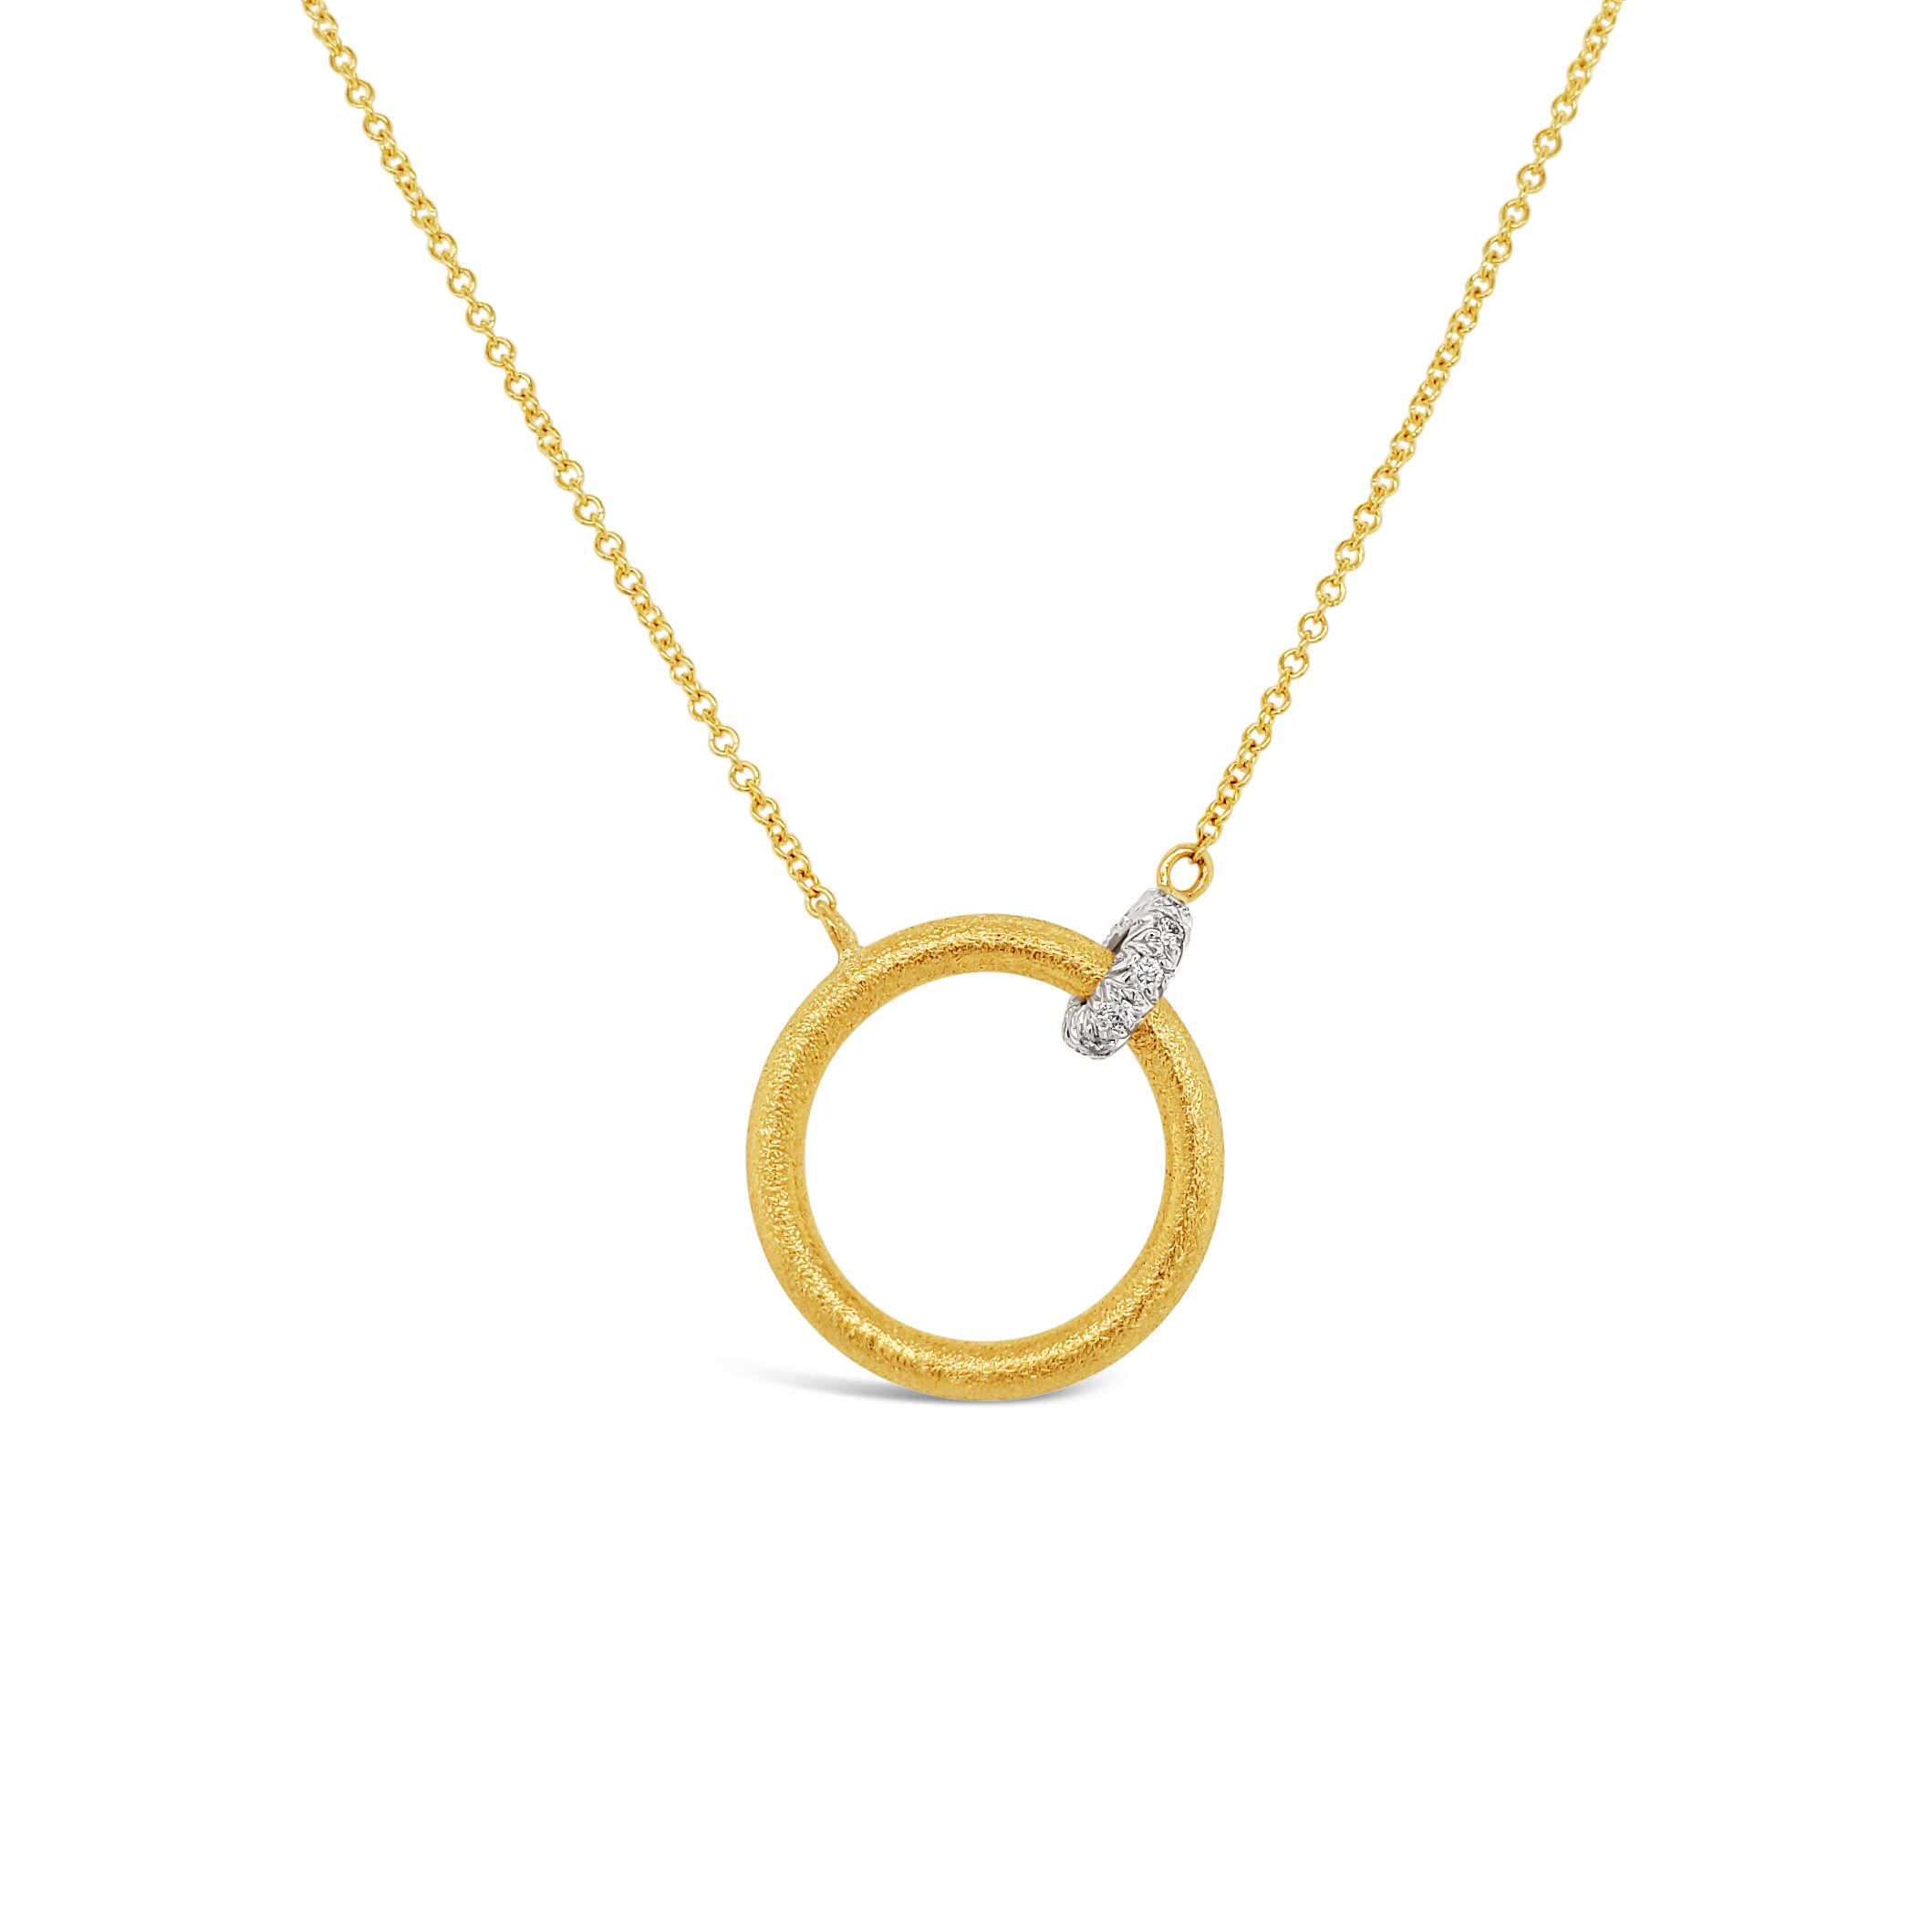 Embrace Open Link Pendant Necklace with Diamond Connector in 18kt Yellow Gold - 16-18"